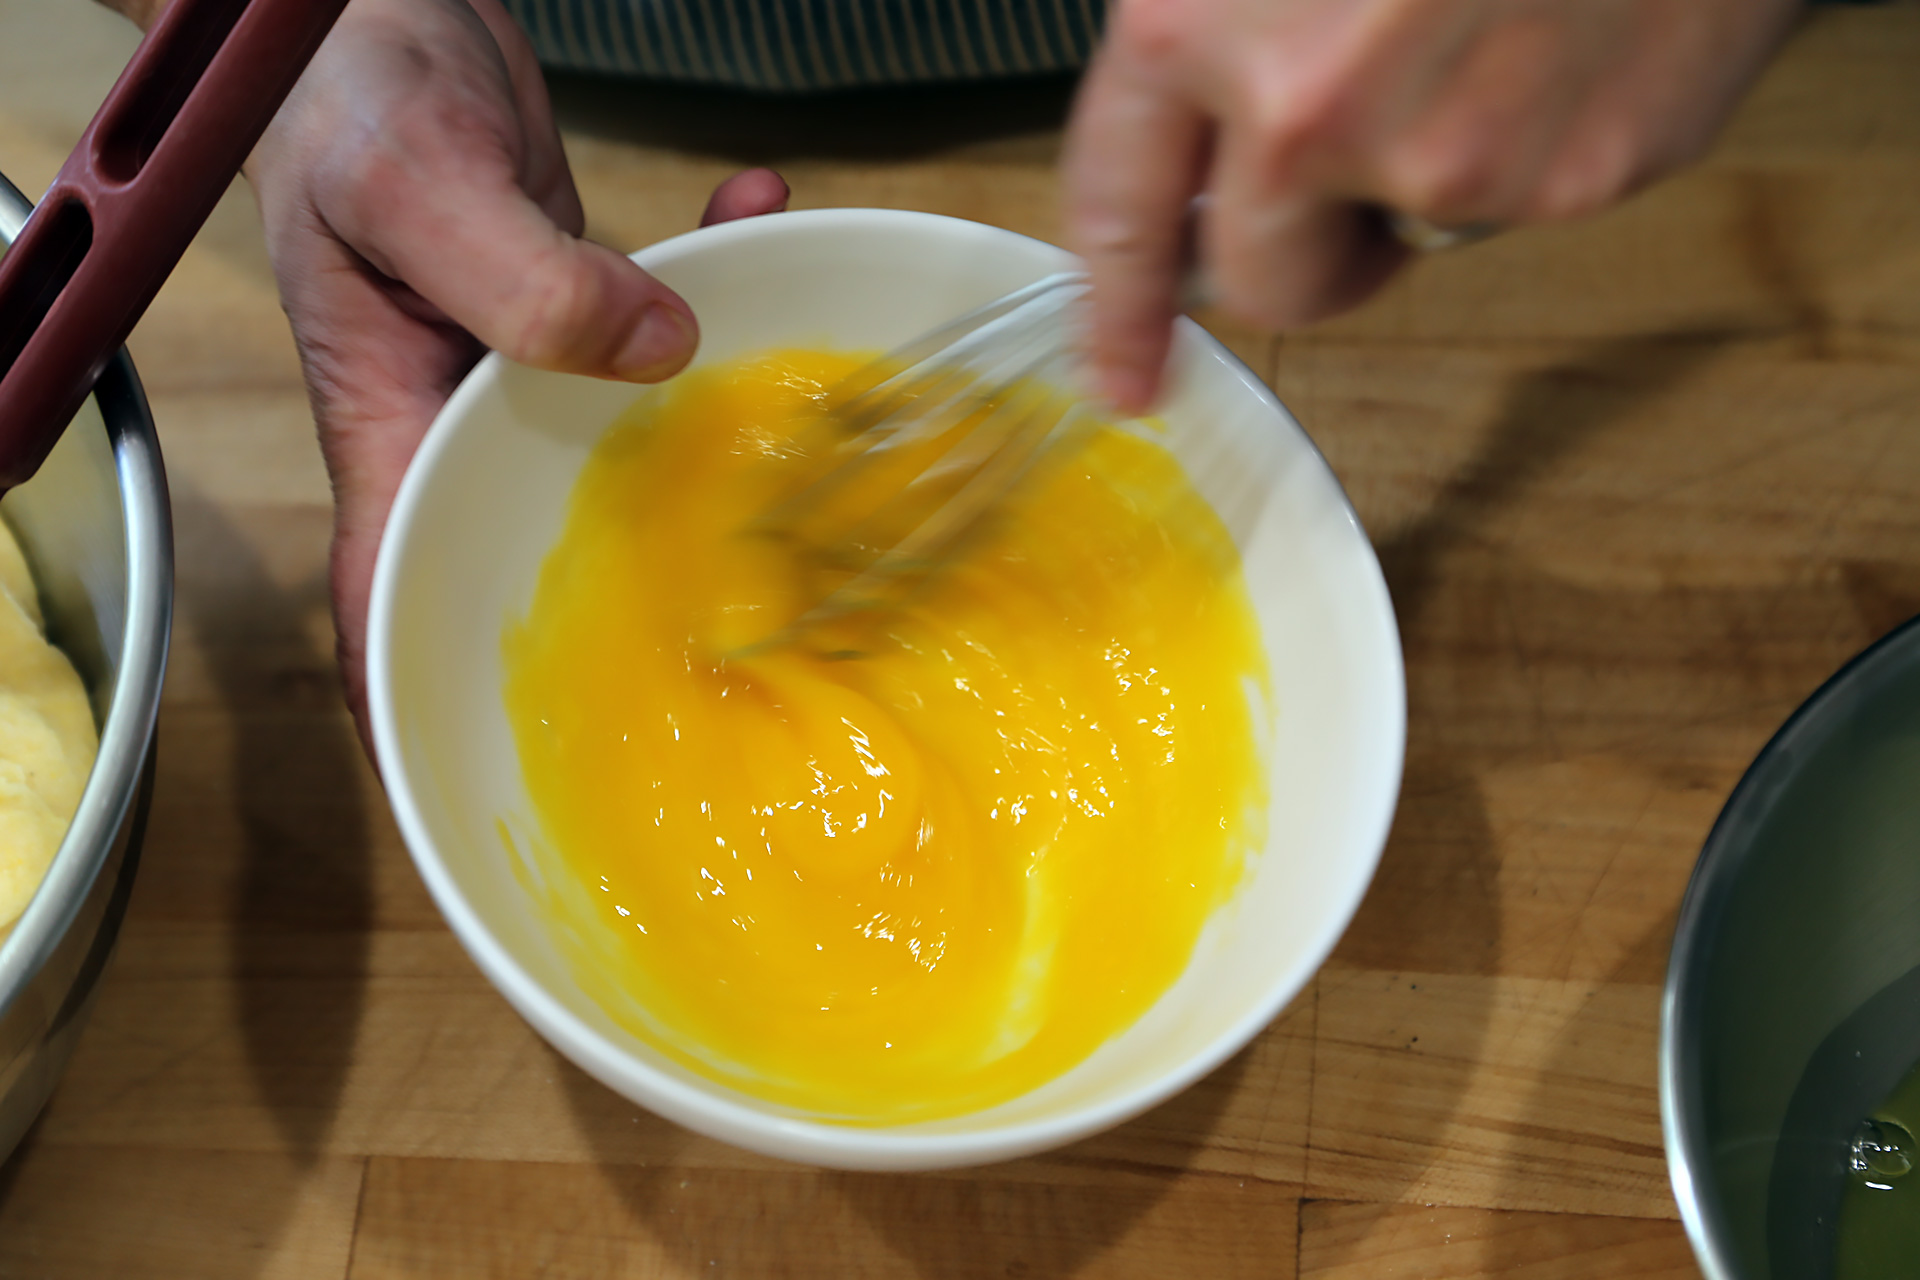 In a bowl, whisk together the egg yolks.